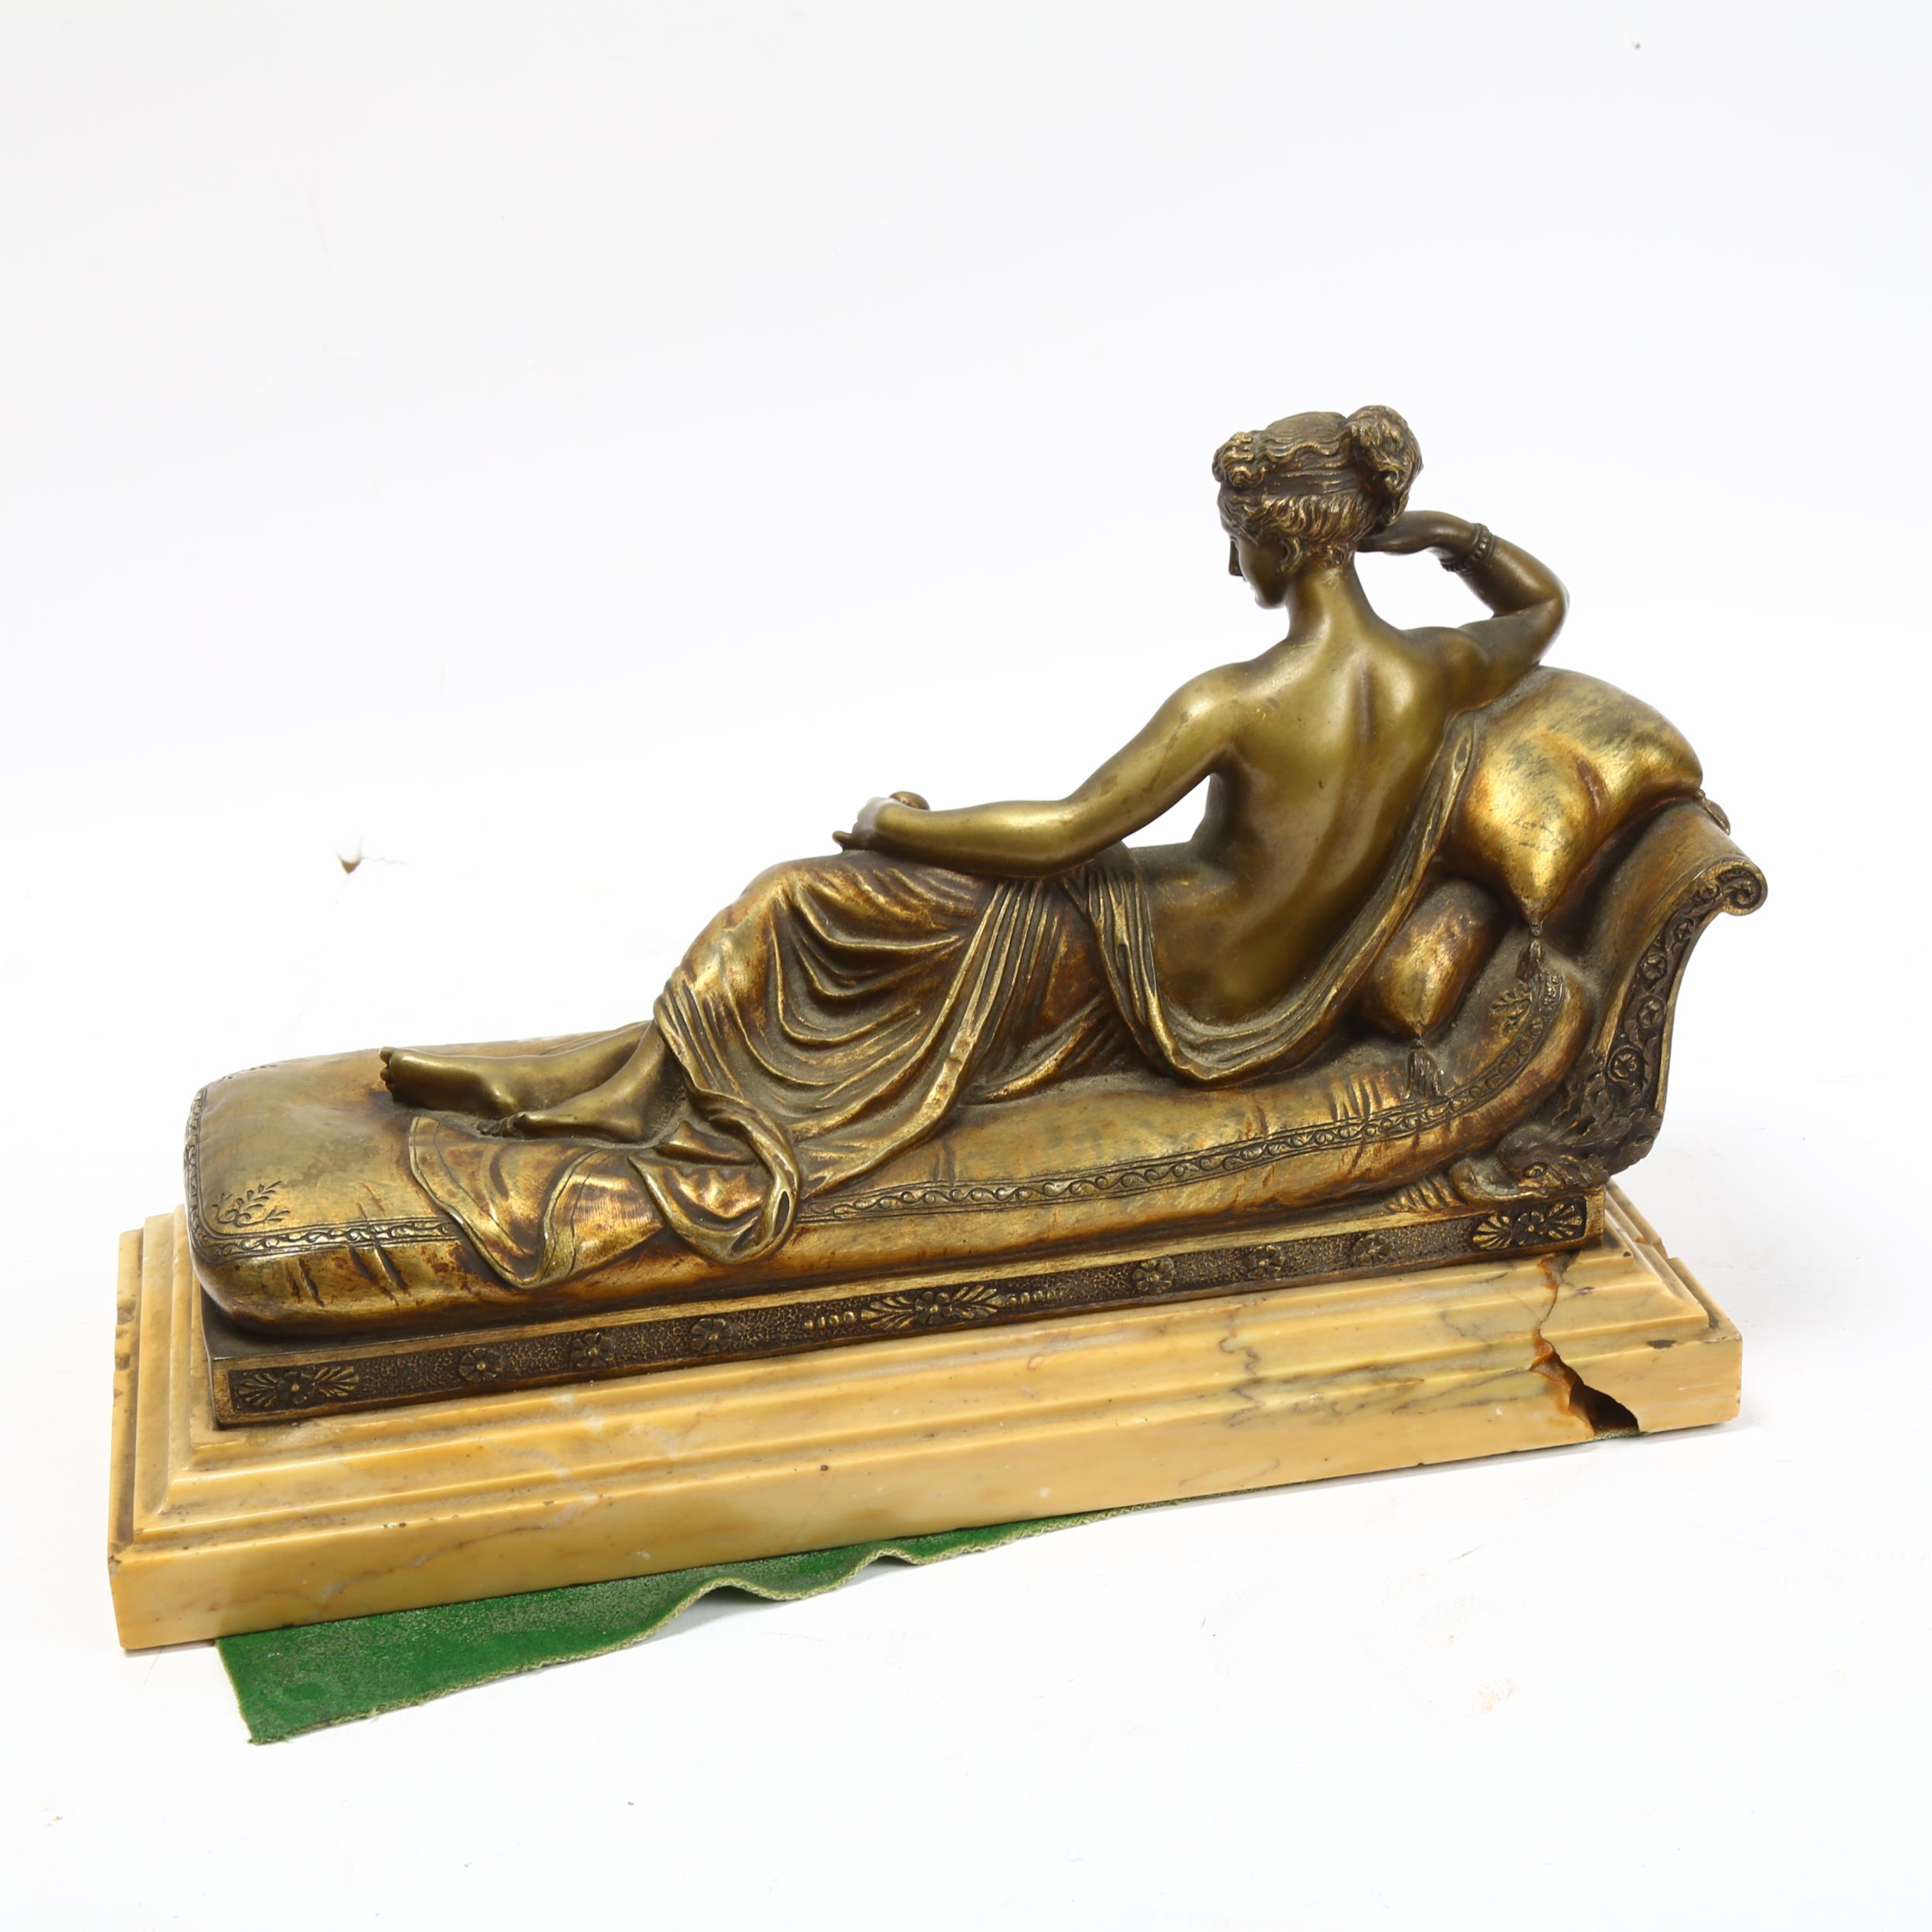 French 19th century gilded bronze figure of Venus after Canova, unsigned with Paris foundry mark, on - Image 3 of 3